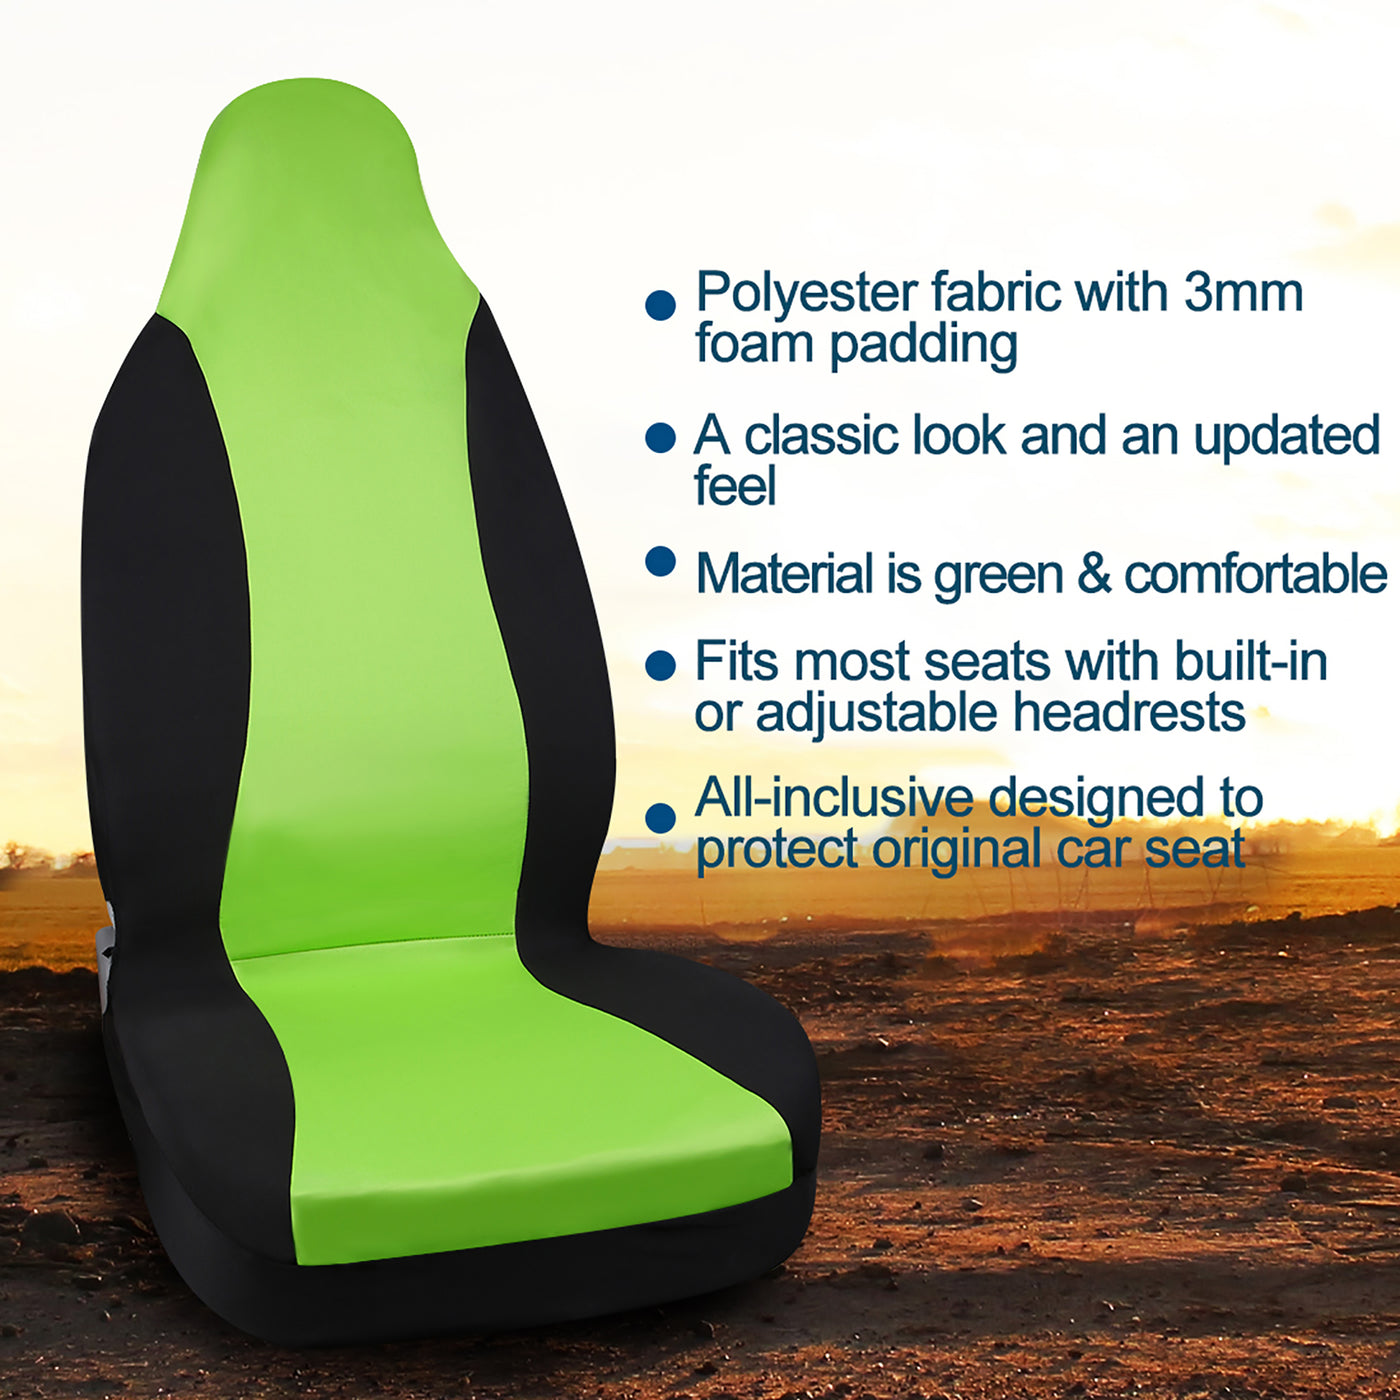 uxcell Uxcell 5 Colours Front High Back Universal Bucket Seat Cover Protector Fit for Auto Car